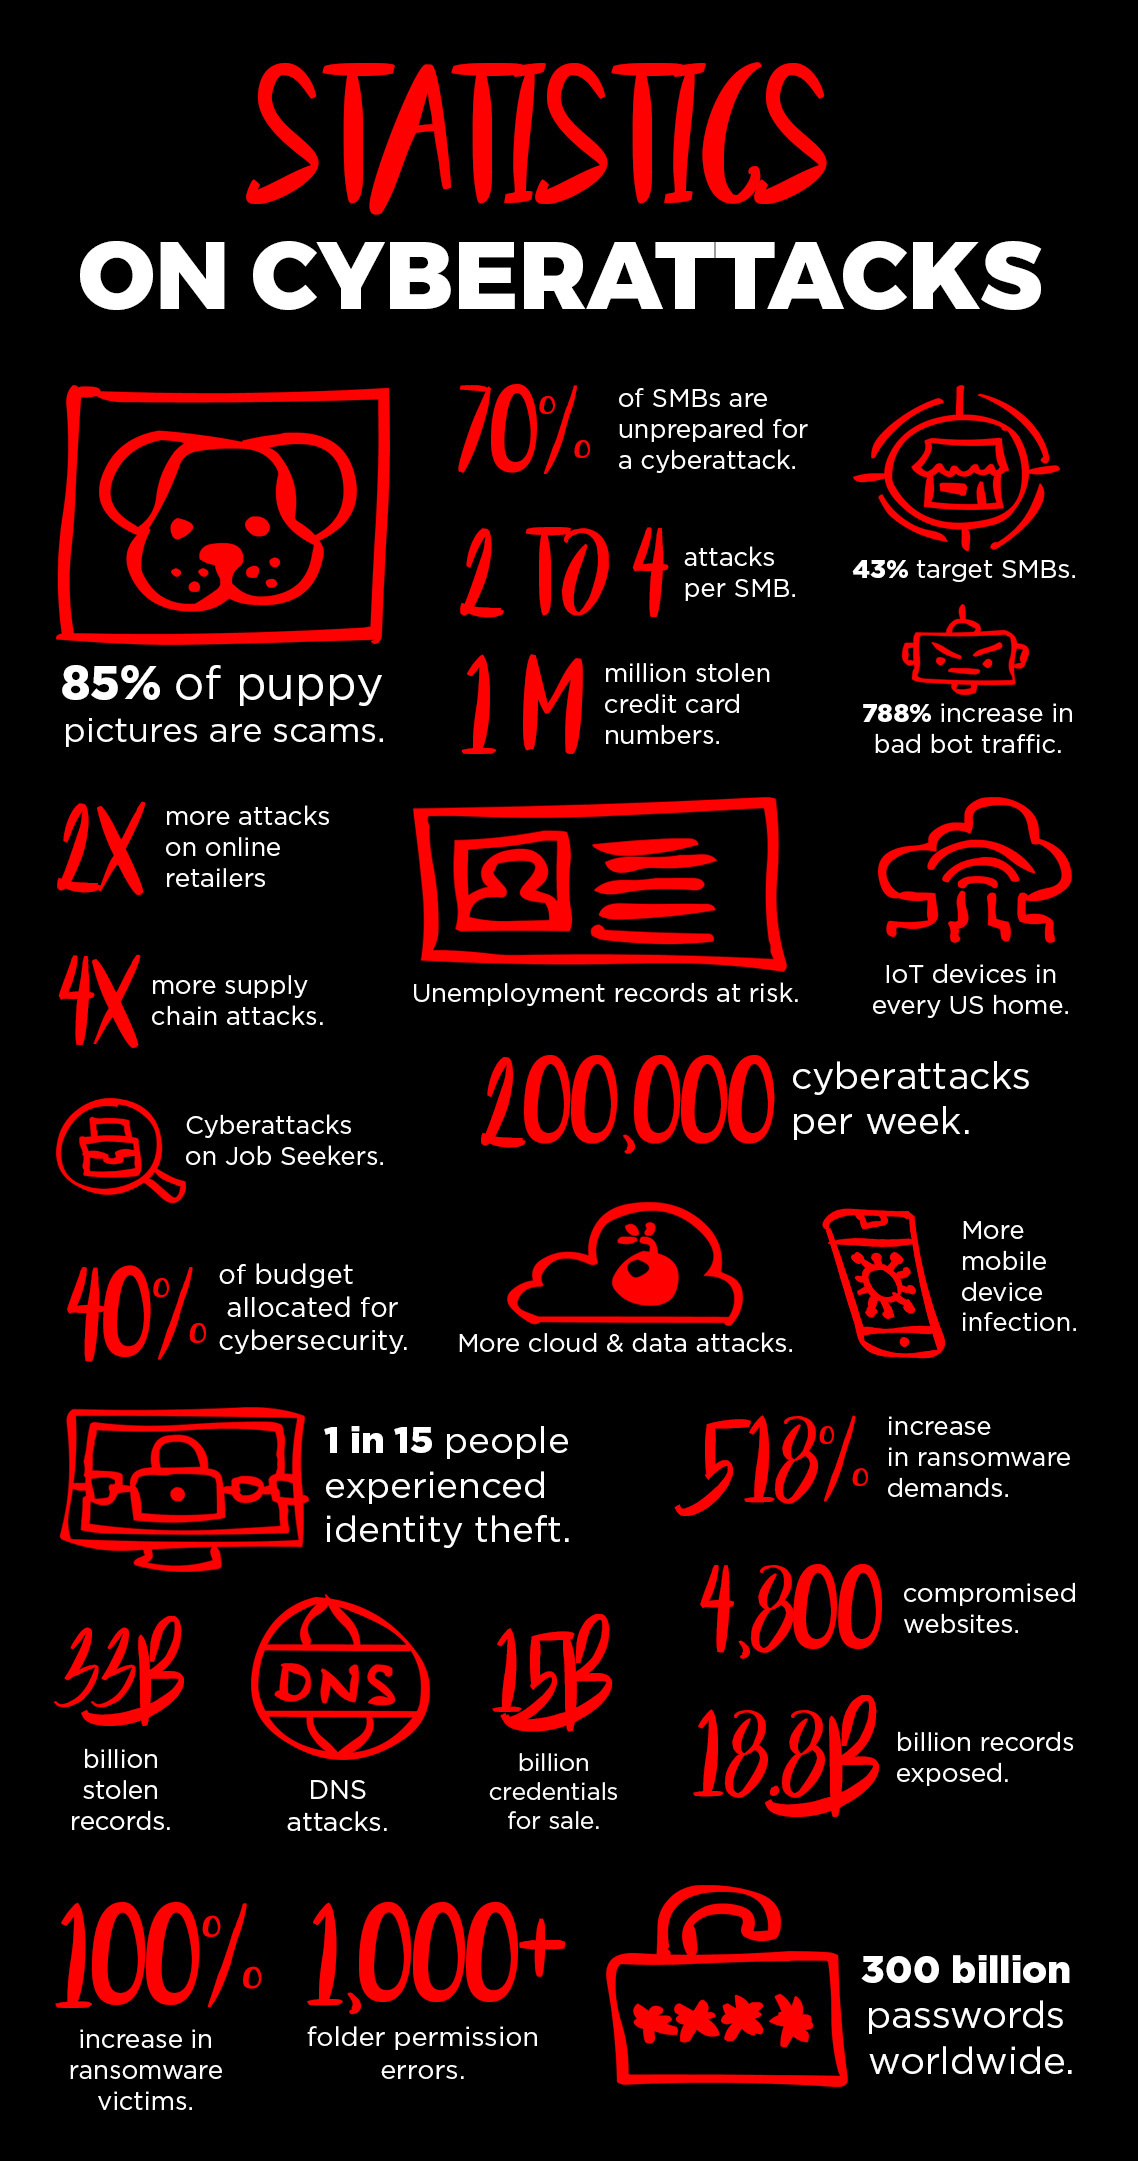 Statistics on Cyberattacks that lead to cybersecurity threats